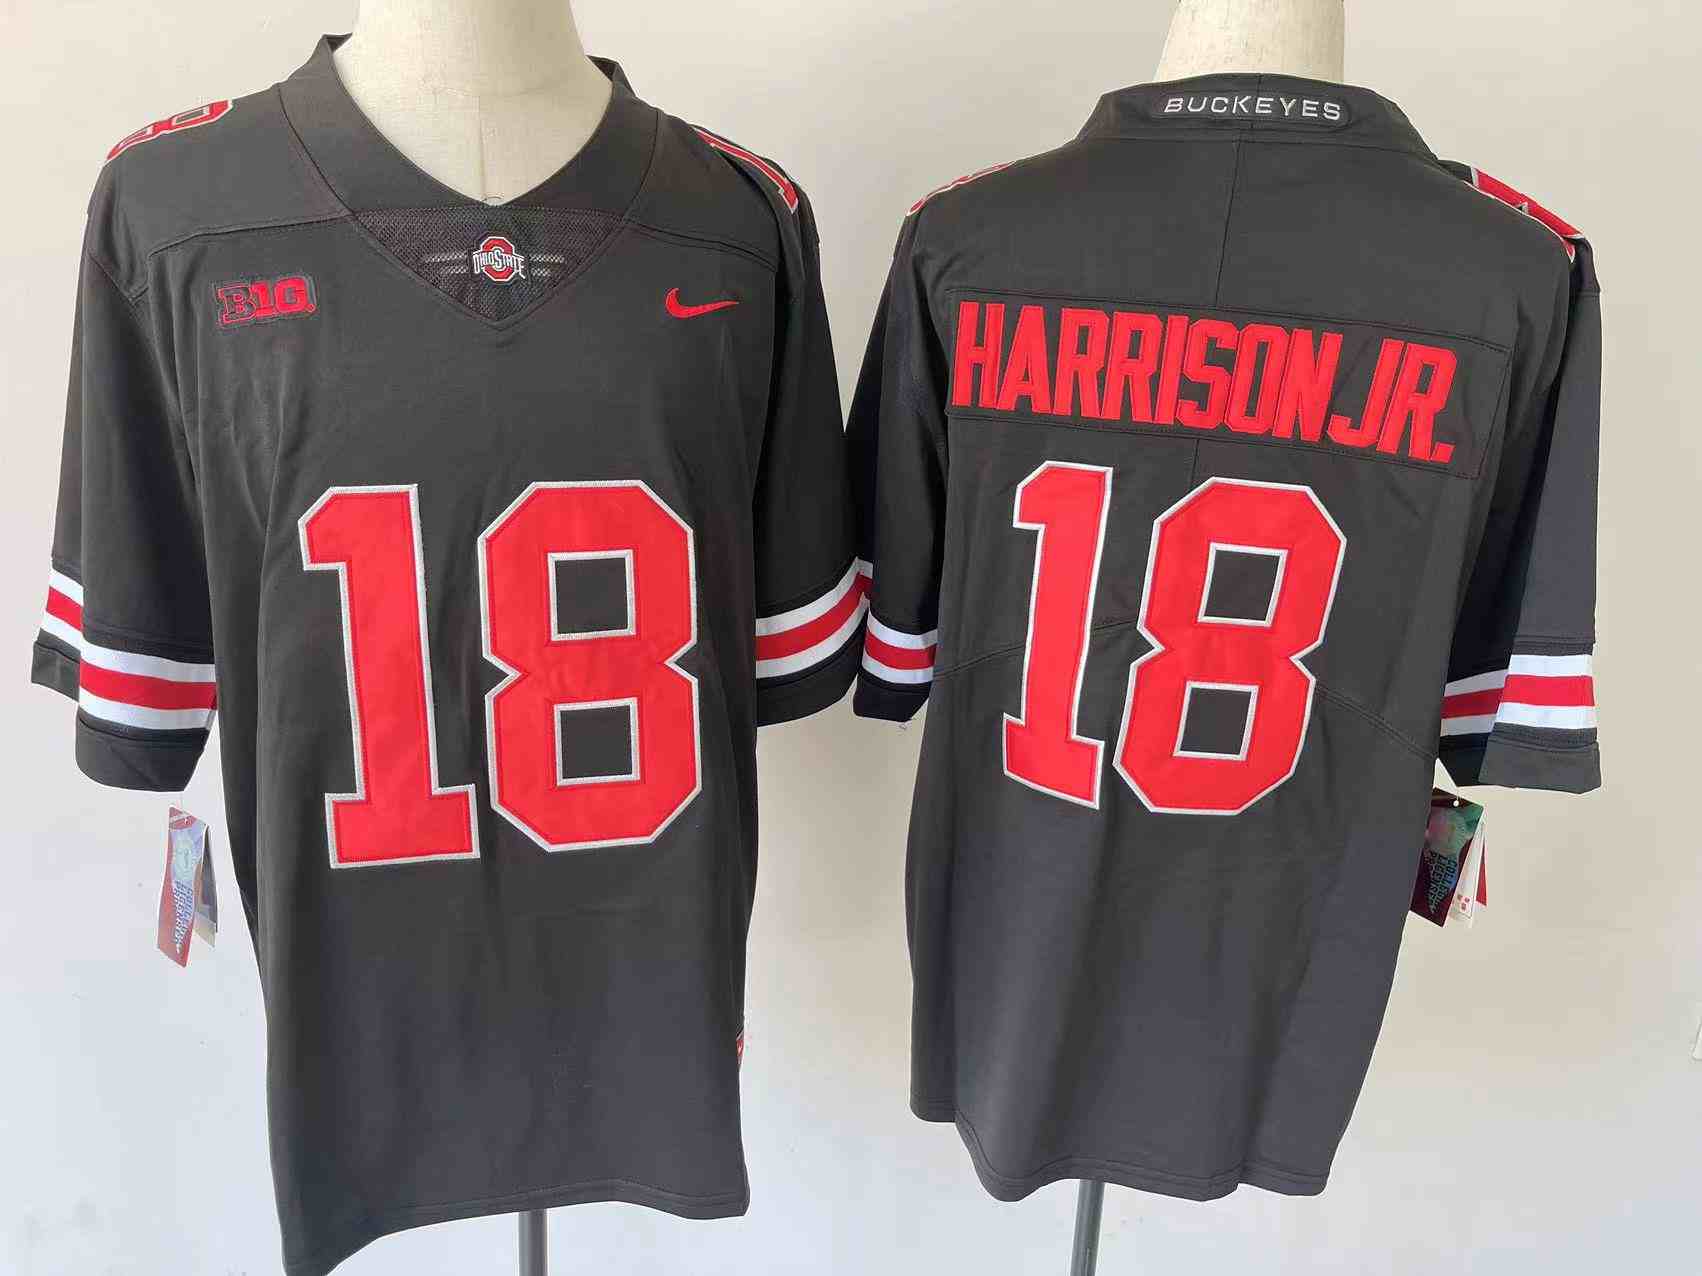 Youth NCAA Ohio State Buckeyes 18 HARRISON JR Black red letter College Football Jersey